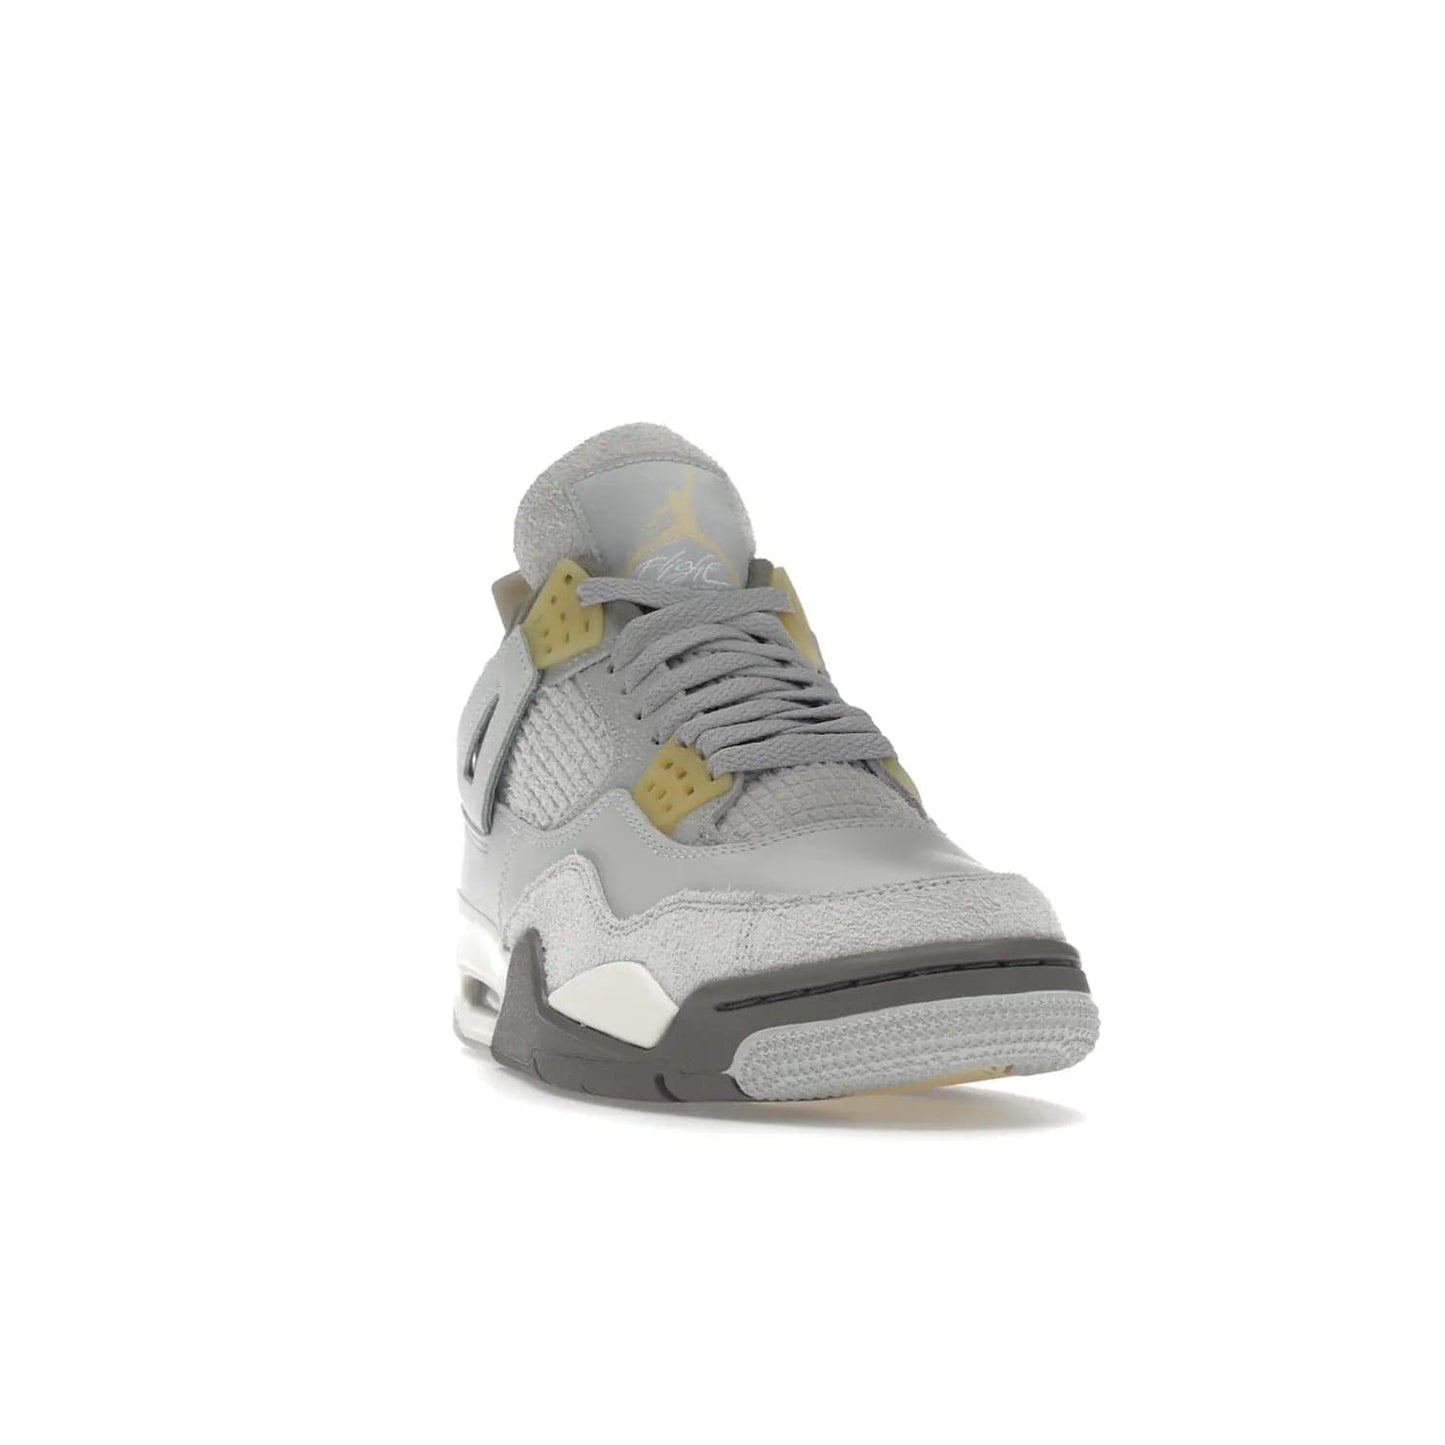 Jordan 4 Retro SE Craft Photon Dust - Image 8 - Only at www.BallersClubKickz.com - Upgrade your shoe collection with the Air Jordan 4 Retro SE Craft Photon Dust. This luxurious sneaker features a combination of suede and leather with unique grey tones like Photon Dust, Pale Vanilla, Off White, Grey Fog, Flat Pewter, and Sail. Available February 11, 2023.